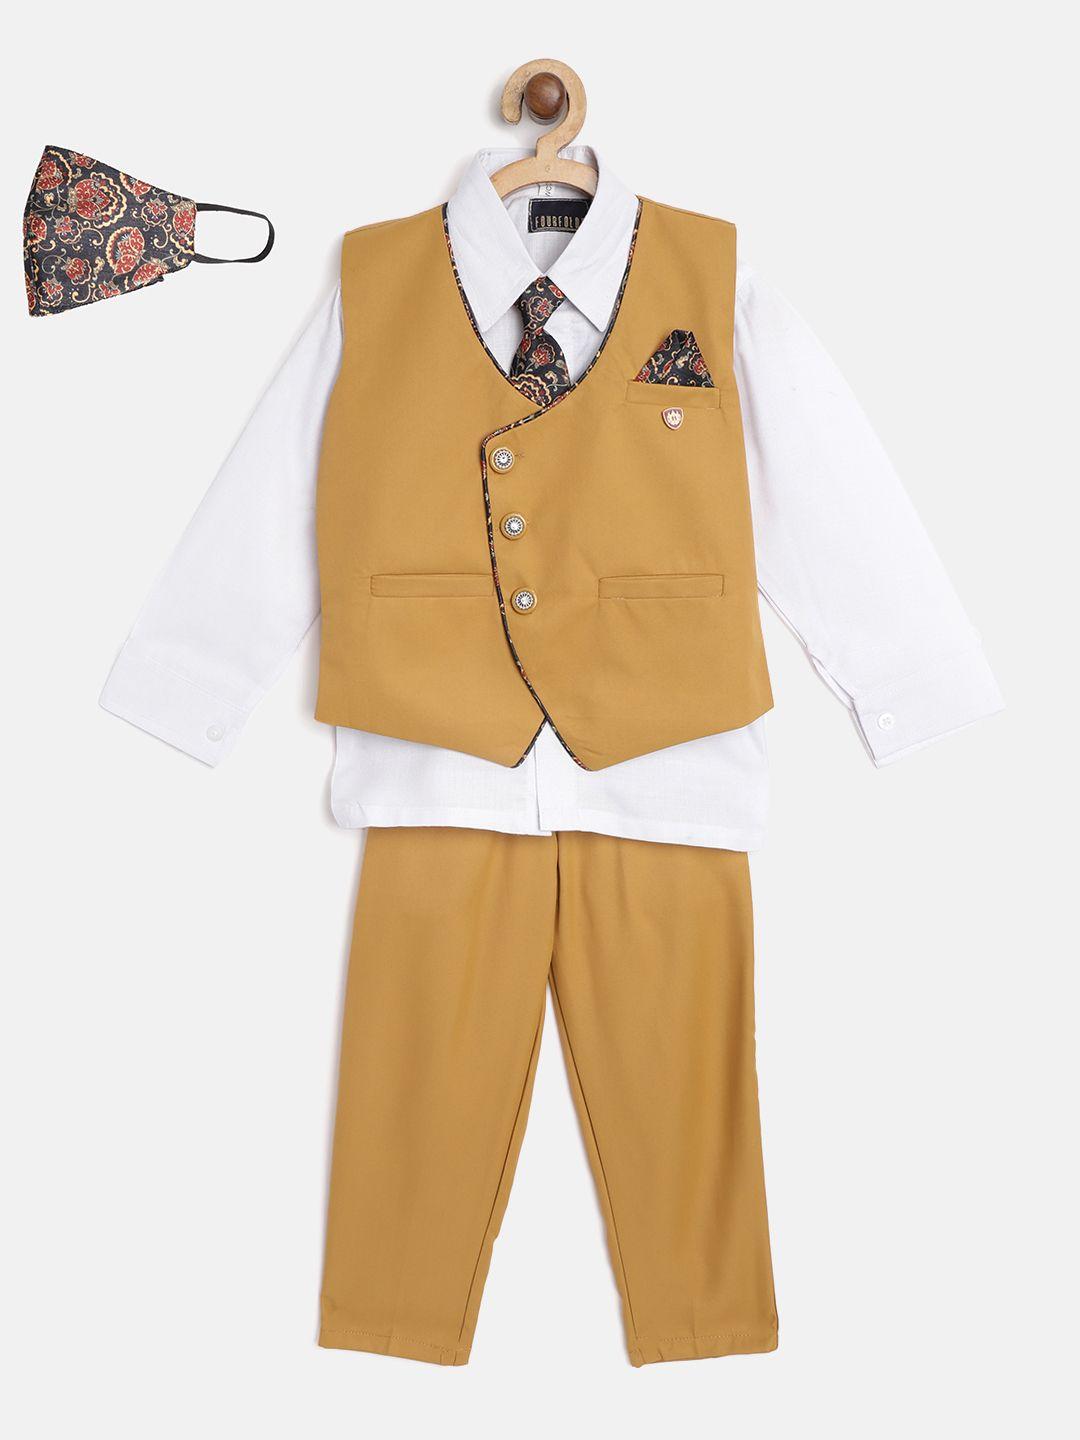 FOURFOLDS Boys White & Mustard Yellow Solid Clothing Set with Waistcoat, Tie & Cloth Mask